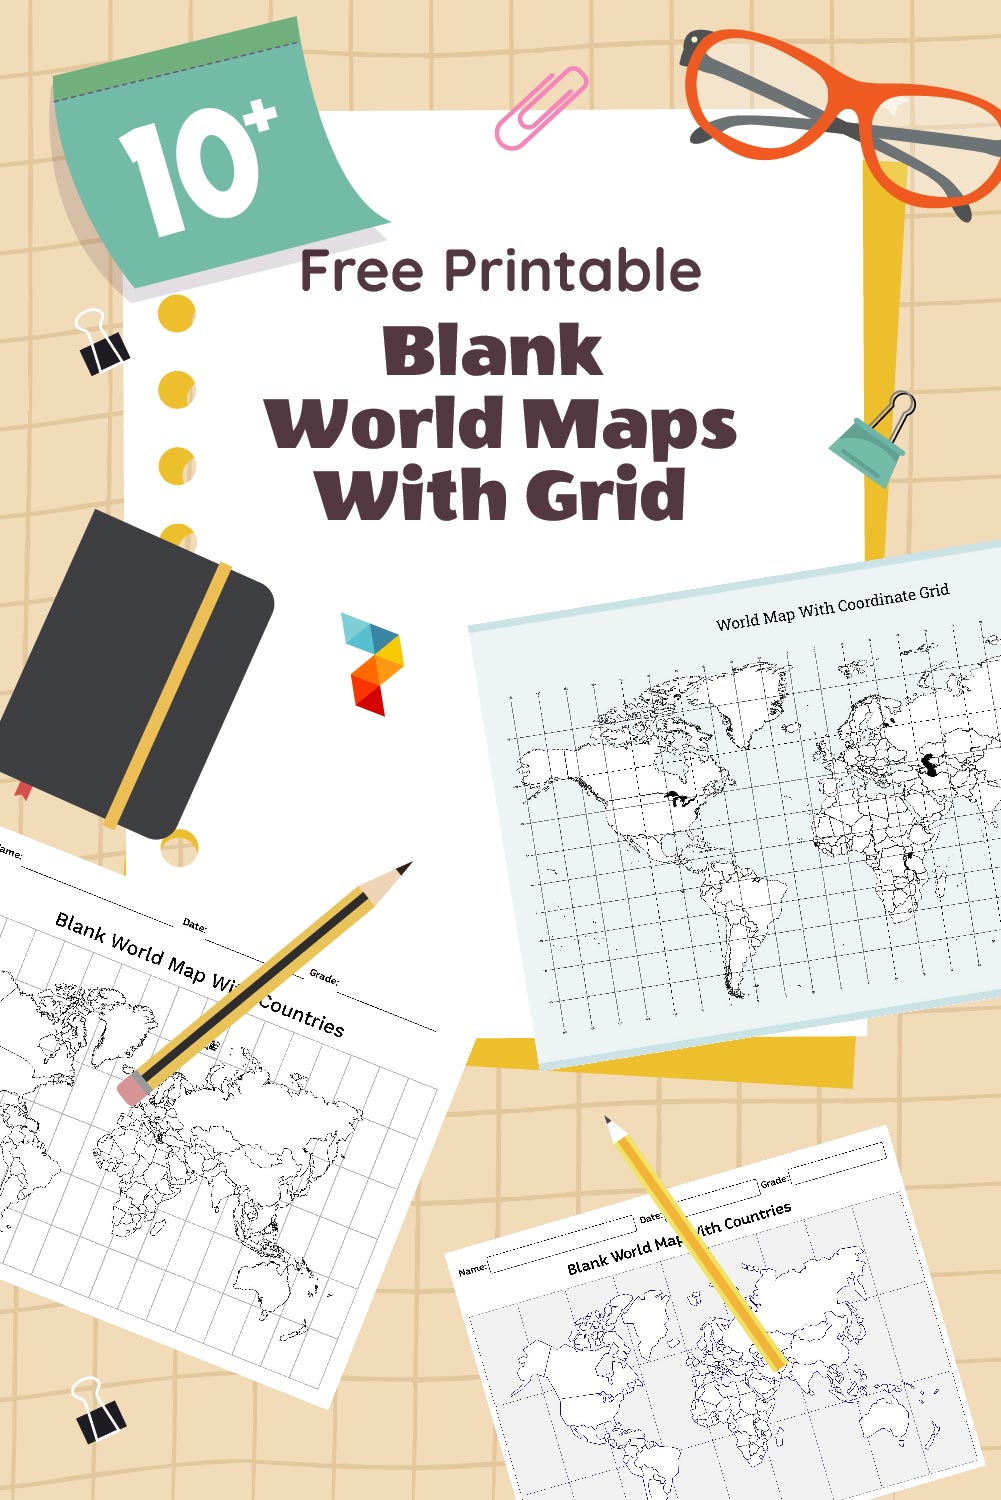 Blank World Maps With Grid